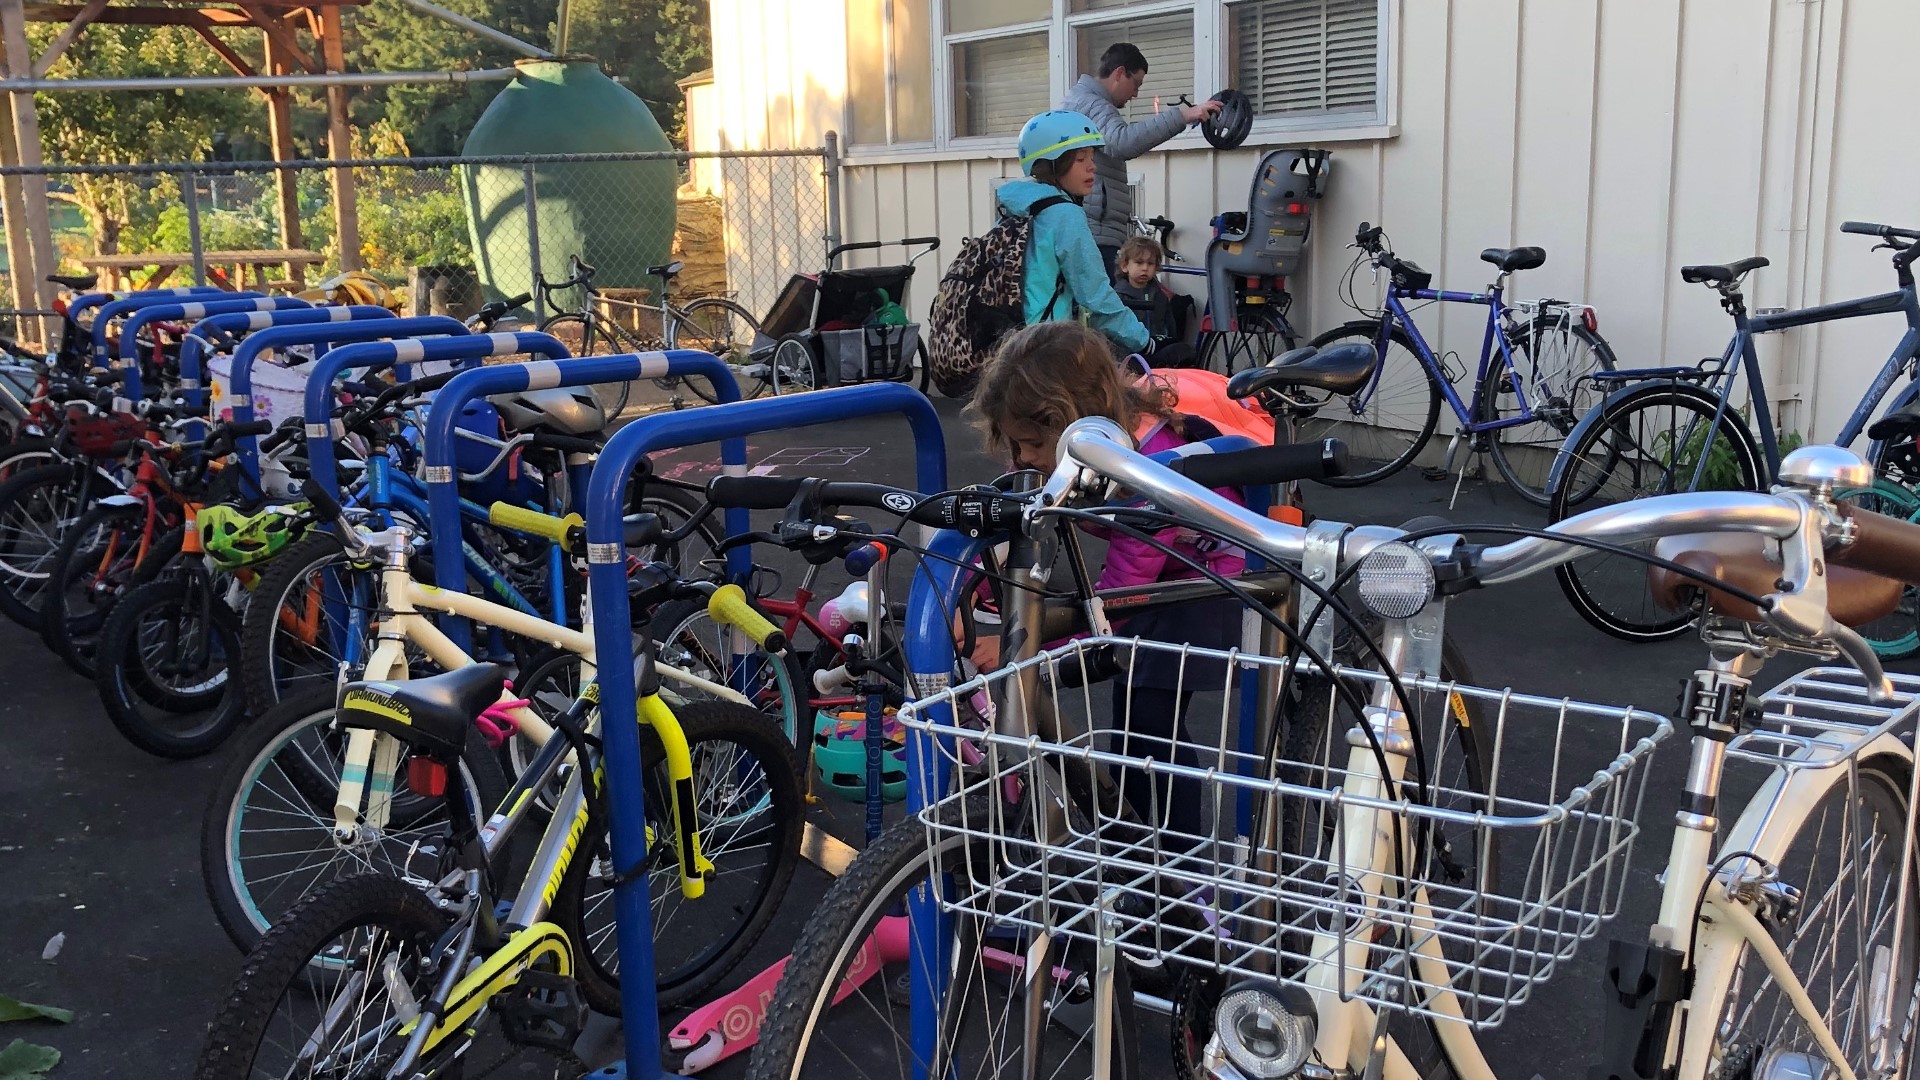 KGW News staffers, who are chronicling a year at Woodlawn Elementary in Portland, stopped by the school for the annual Walk, Bike or Roll To School Day.